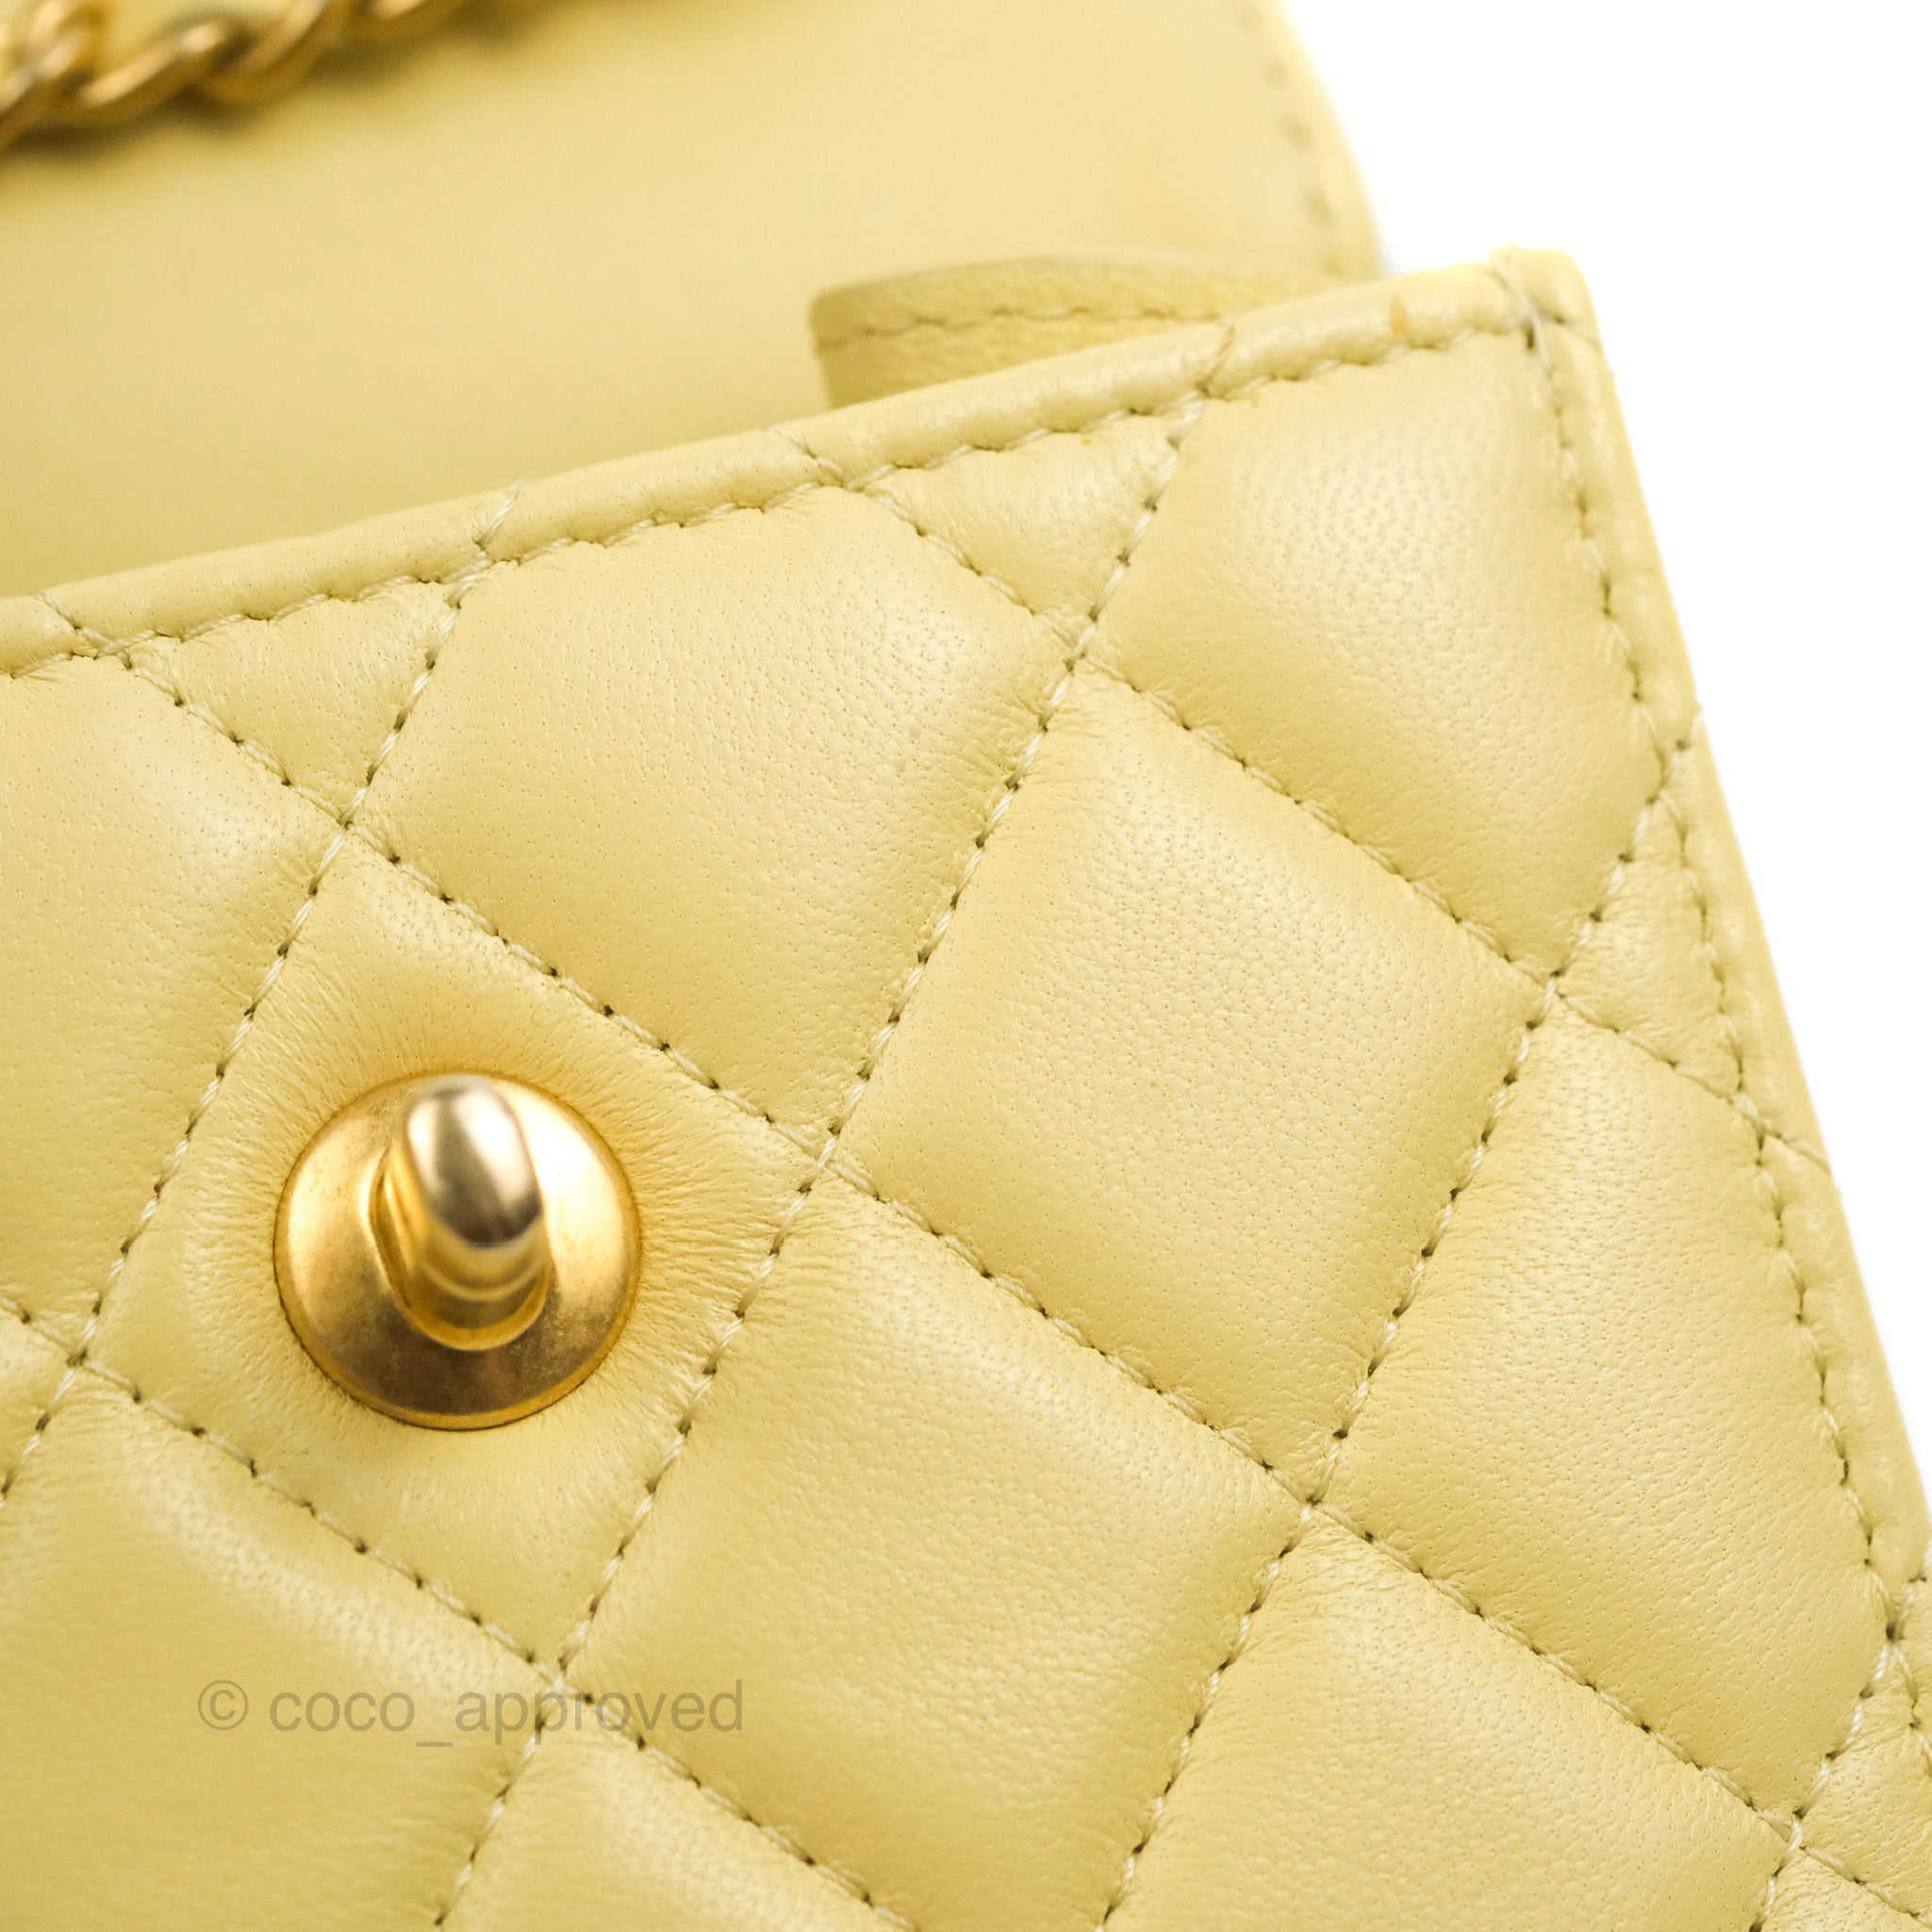 Chanel Quilted Pearl Crush Phone Holder With Chain Yellow Lambskin – Coco  Approved Studio